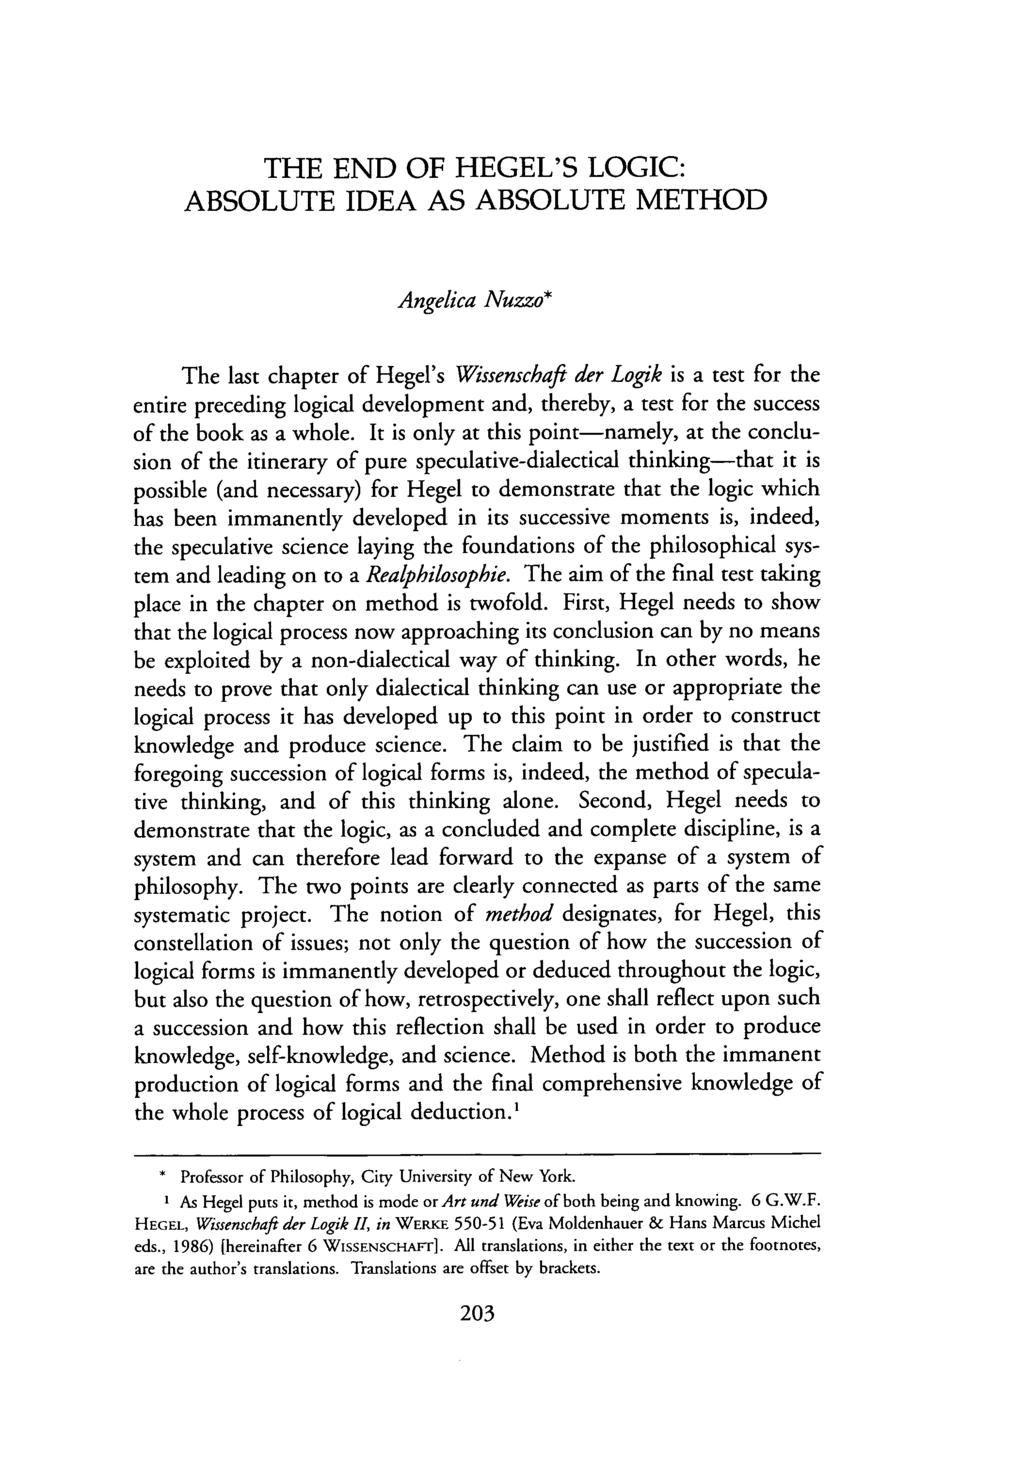 THE END OF HEGEL'S LOGIC: ABSOLUTE IDEA AS ABSOLUTE METHOD Angelica Nuzzo* The last chapter of Hegel's Wissenschafl der Logik is a test for the entire preceding logical development and, thereby, a